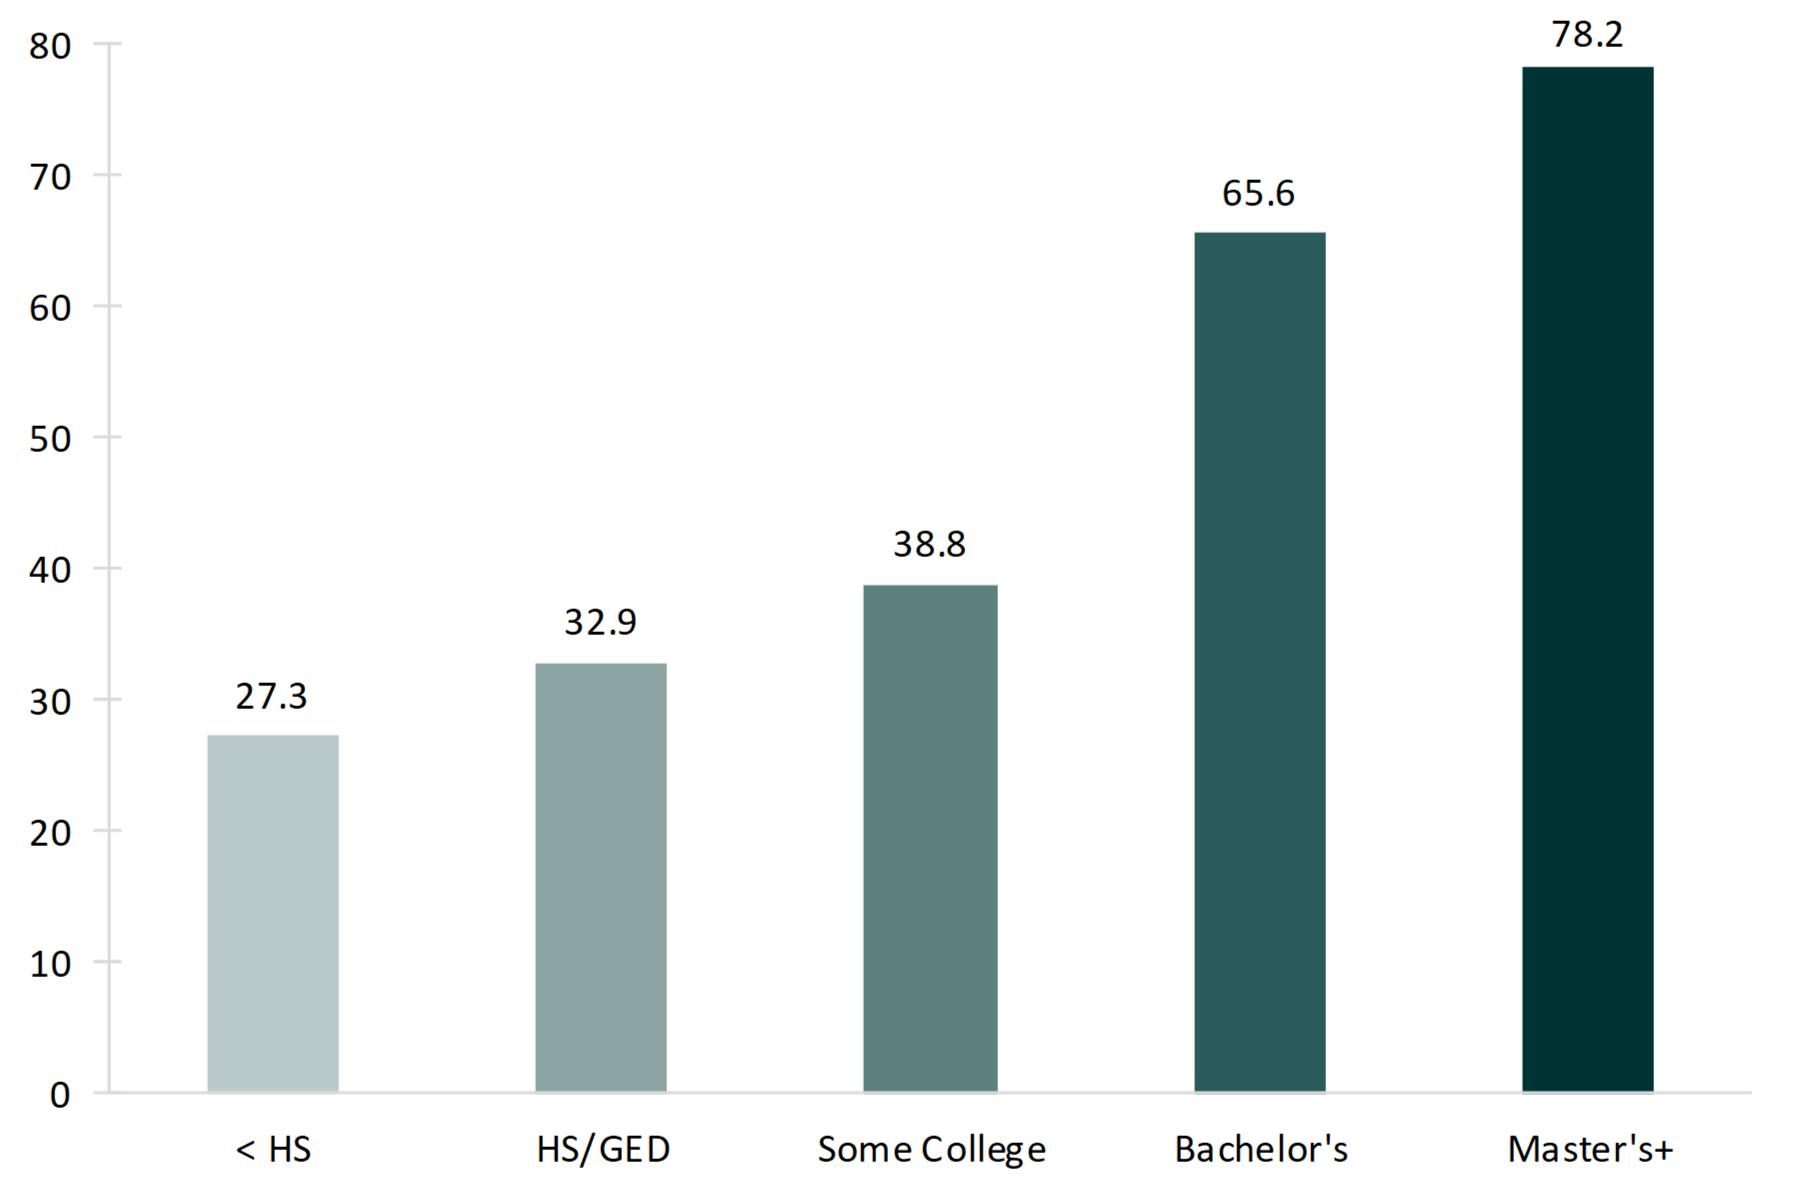 teal bar chart showing Figure 3. First Marriage Rate for Women Aged 18 and Older by Education, 2018